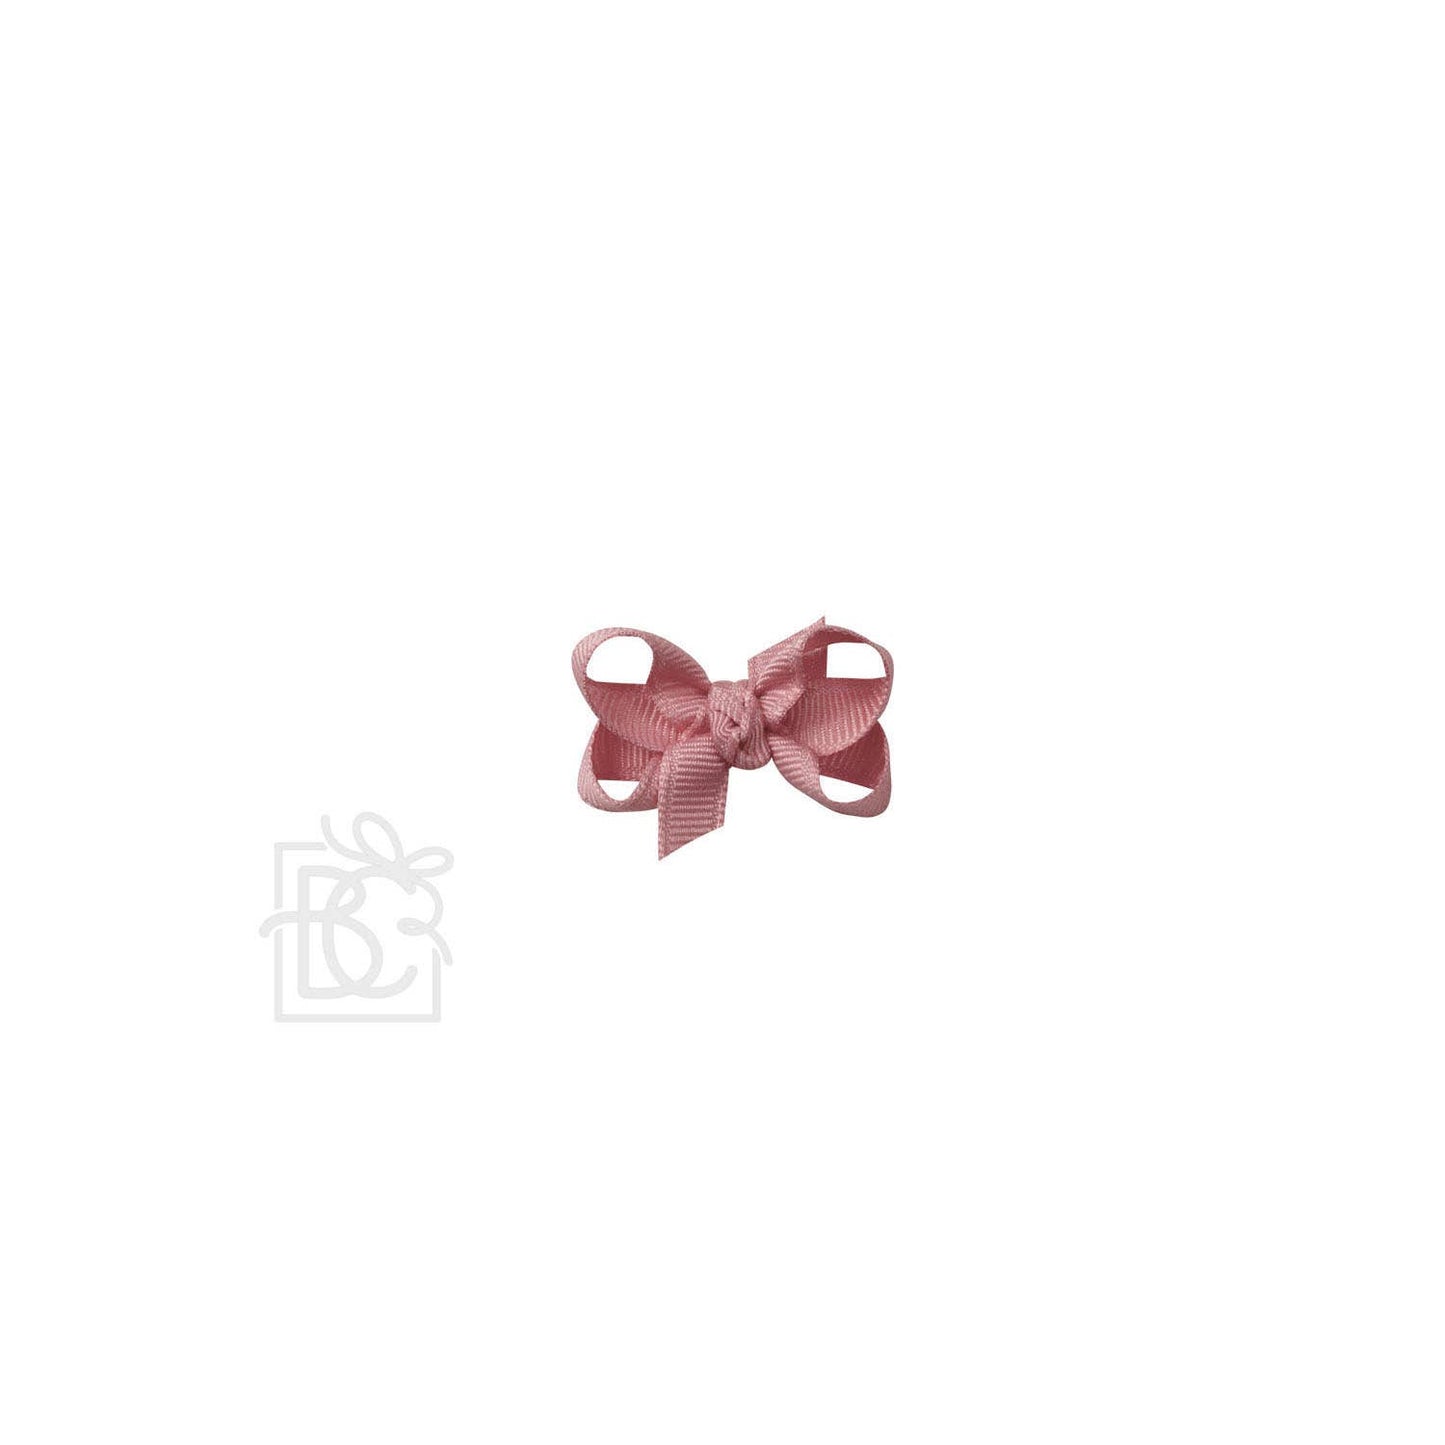 SIGNATURE GROSGRAIN BOW ON CLIP: LT. ORCHID / 3" Small - 5/8" Ribbon on Alligator Clip